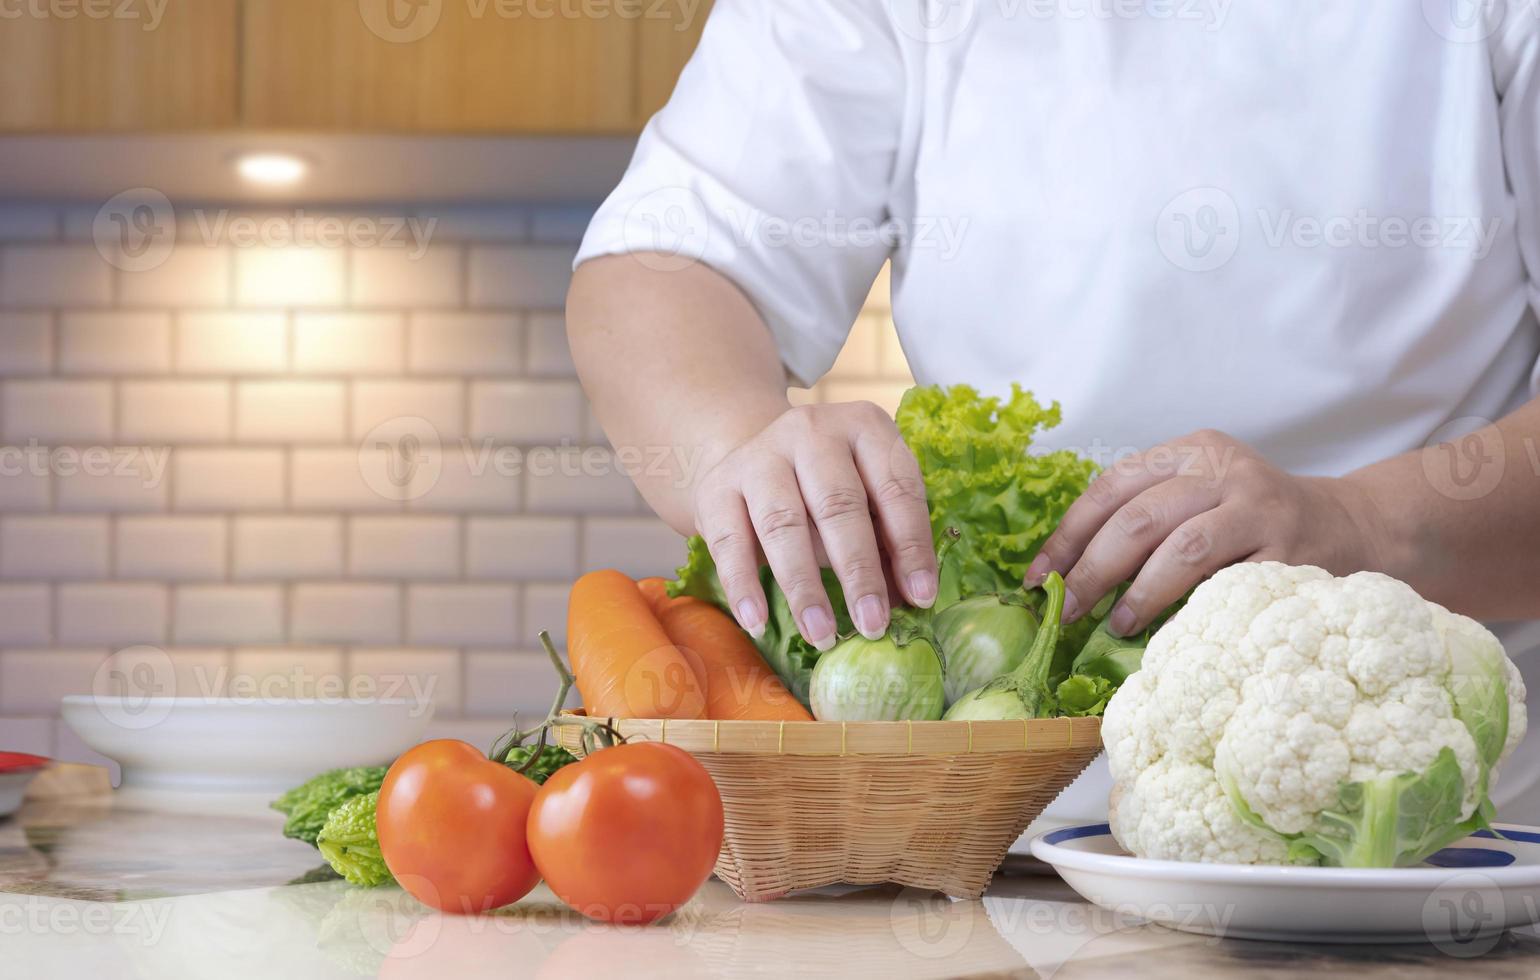 Close up of overweight woman hand preparing various organic vegetables into bamboo basket for cooking on kitchen table, healthy lifestyle concept photo